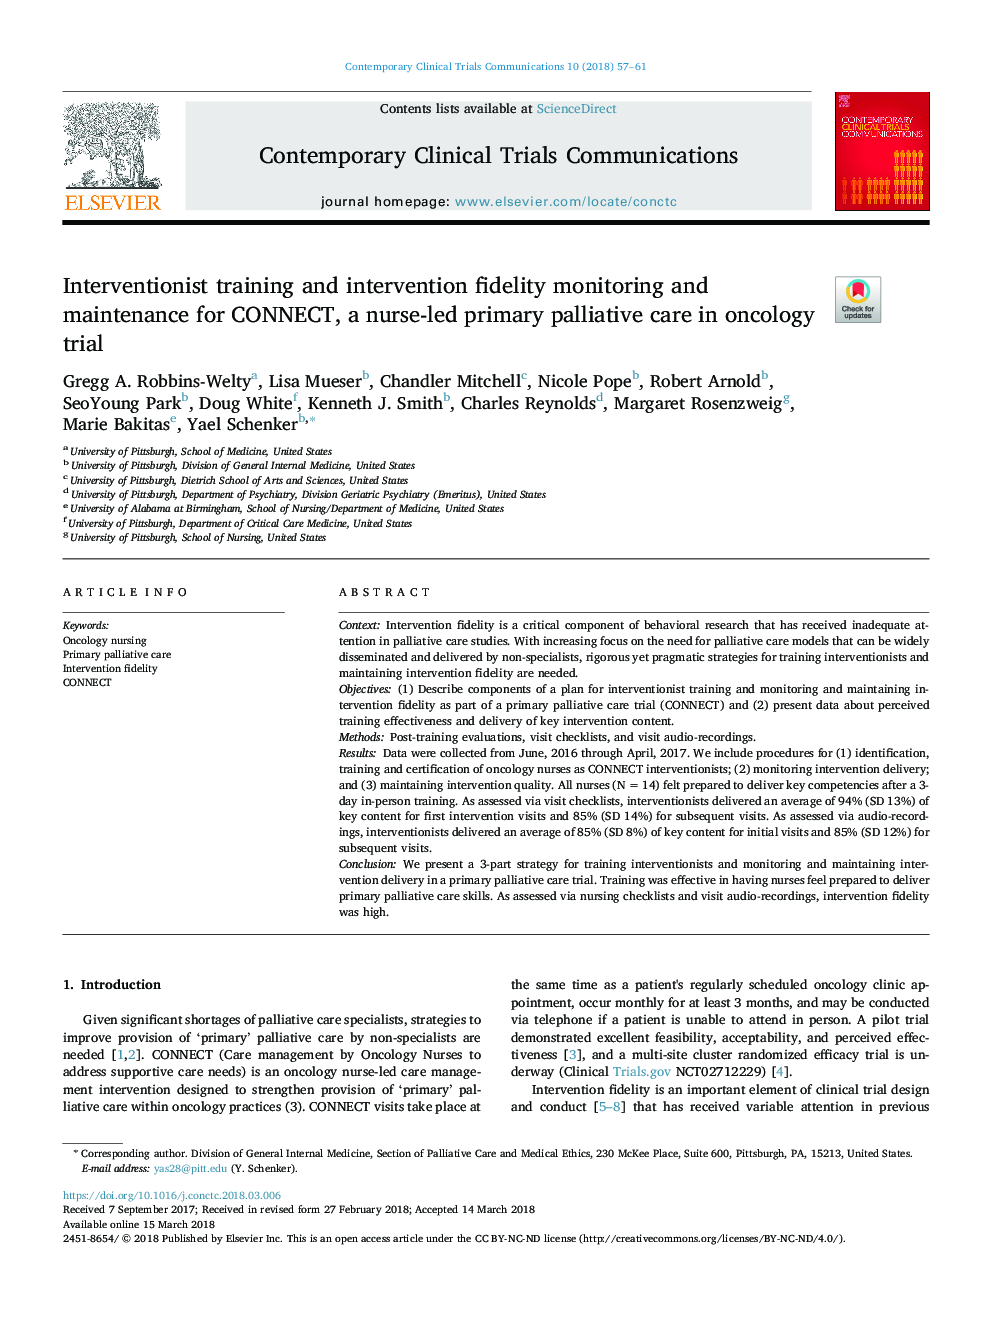 Interventionist training and intervention fidelity monitoring and maintenance for CONNECT, a nurse-led primary palliative care in oncology trial